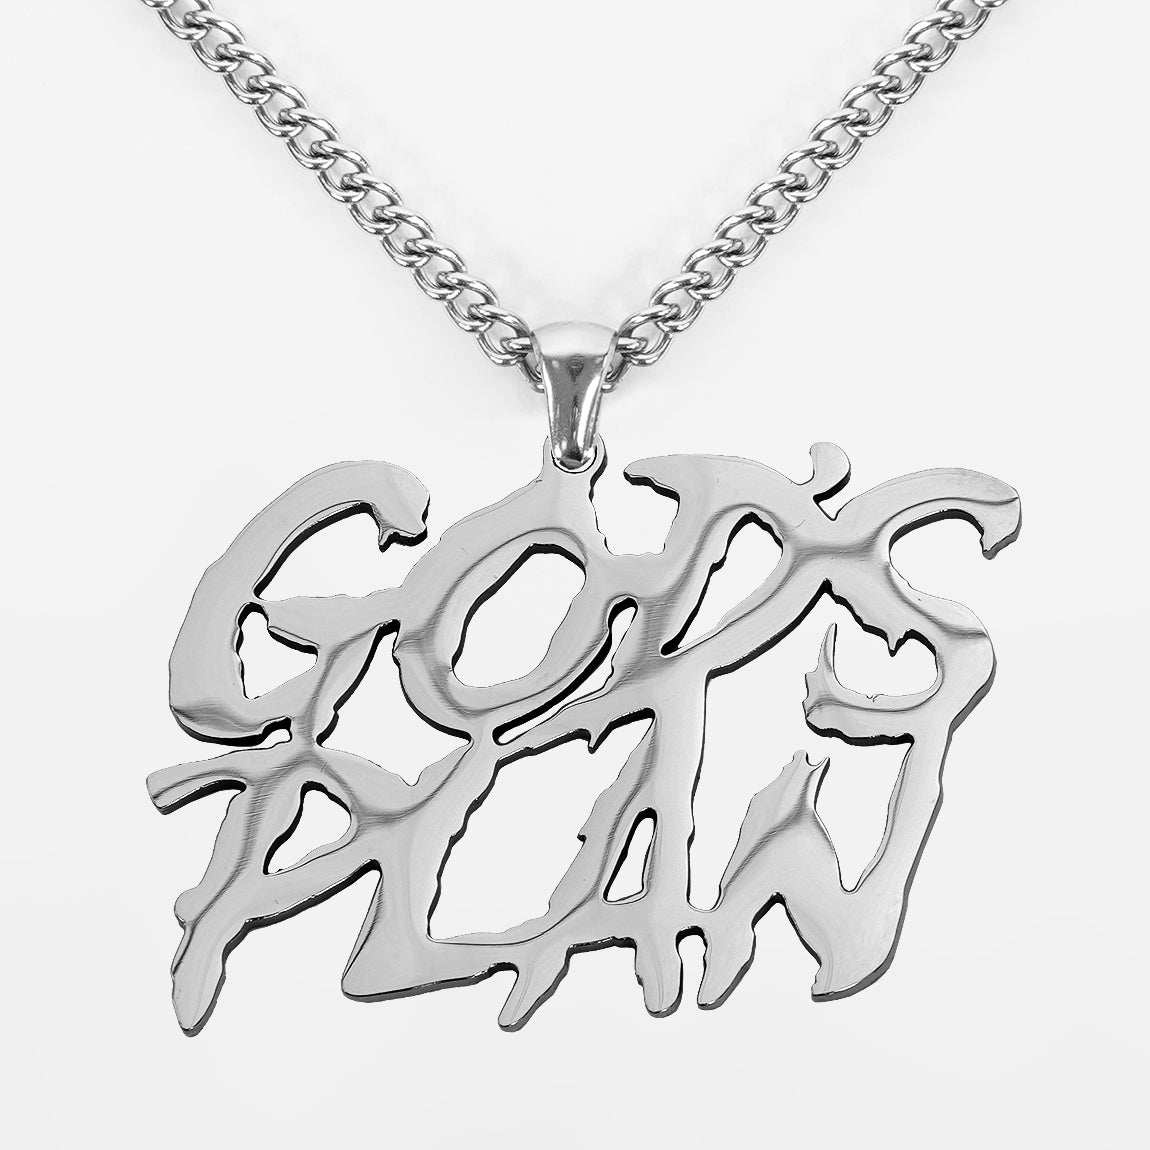 God's Plan Pendant with Chain Necklace - Stainless Steel